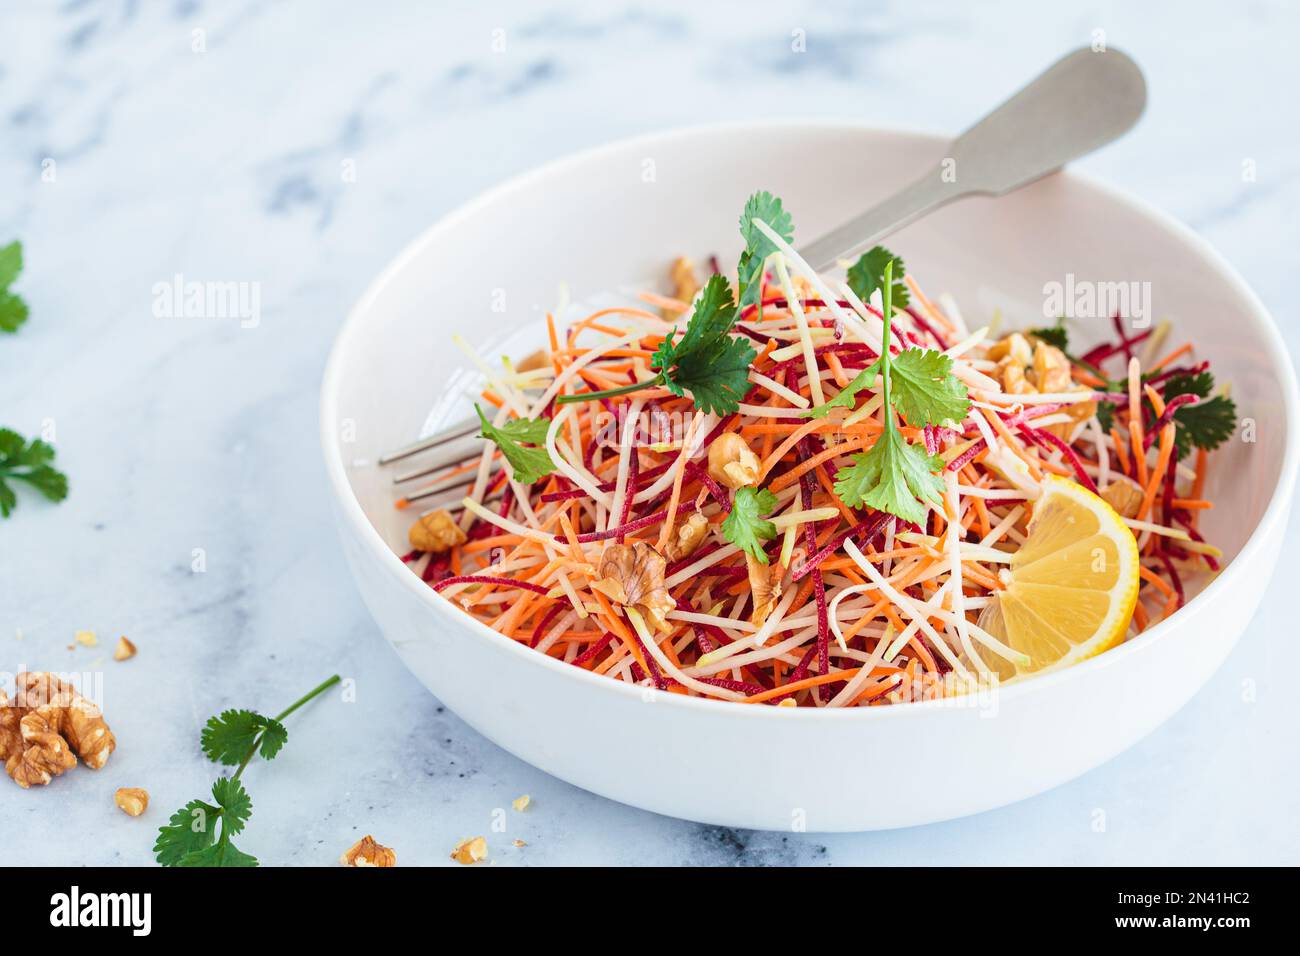 Spring carrots, beets, cabbage salad with nuts and herbs in a white bowl. Stock Photo